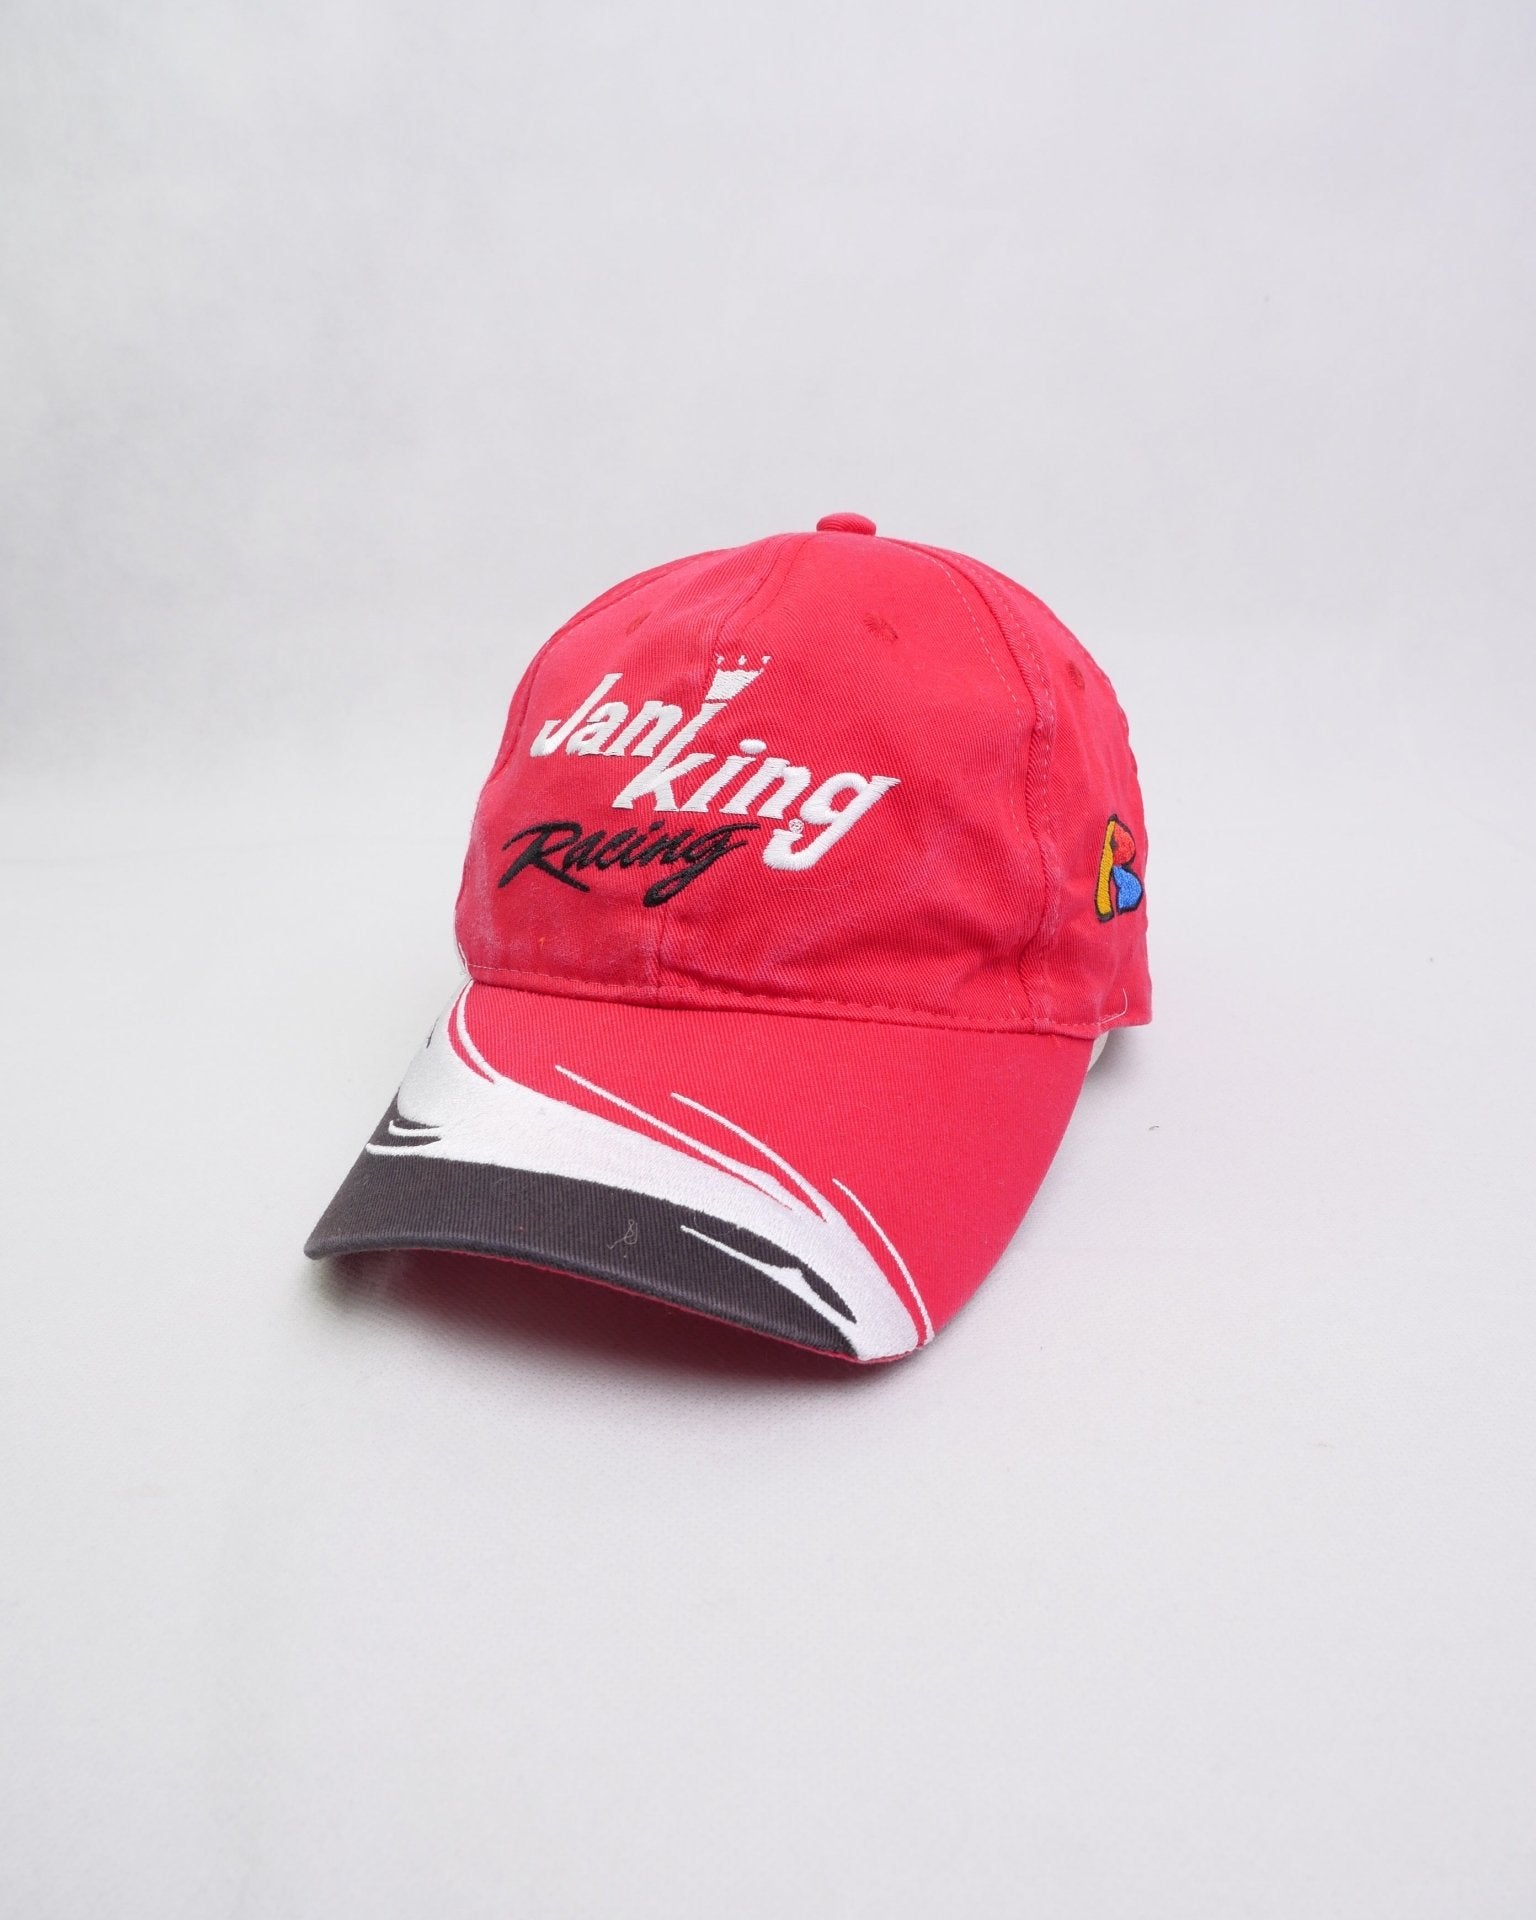 Jan King Racing embroidered Logo Cap Accessoire - Peeces